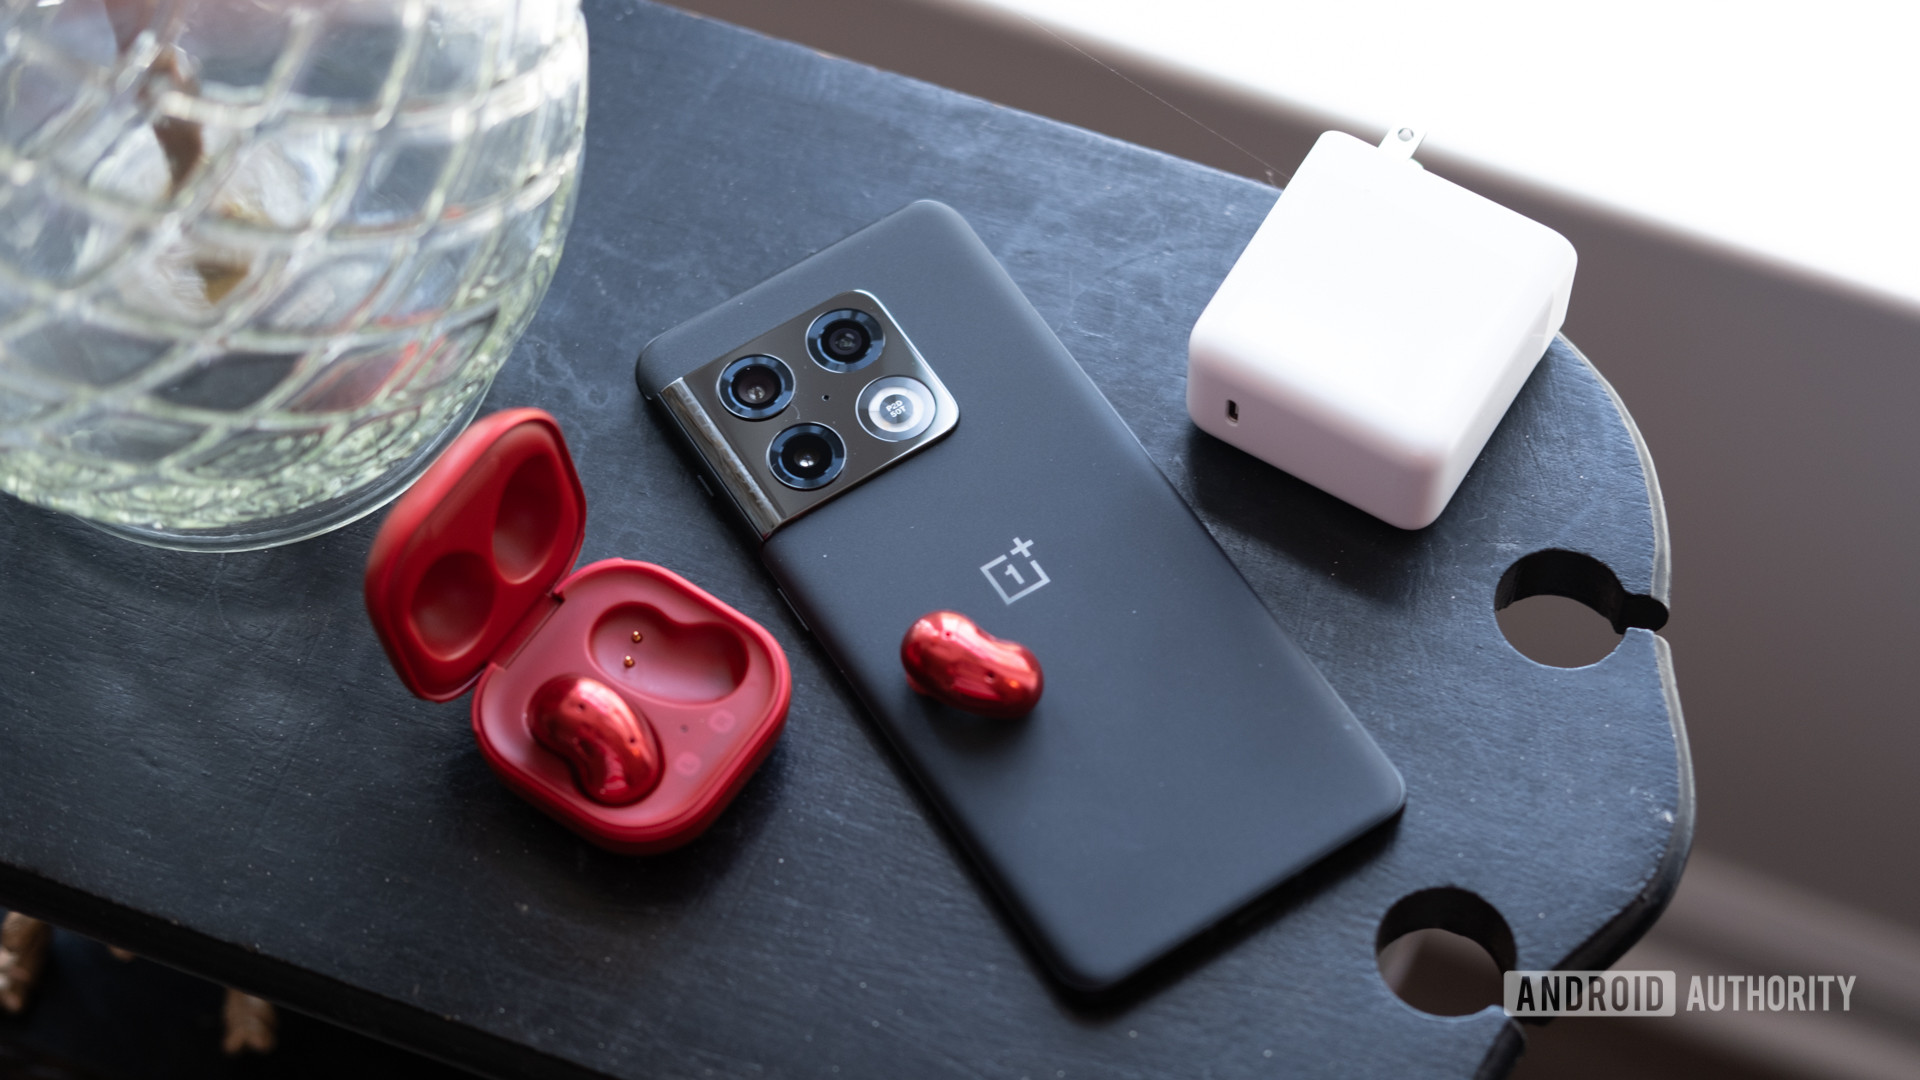 OnePlus earbuds and charger